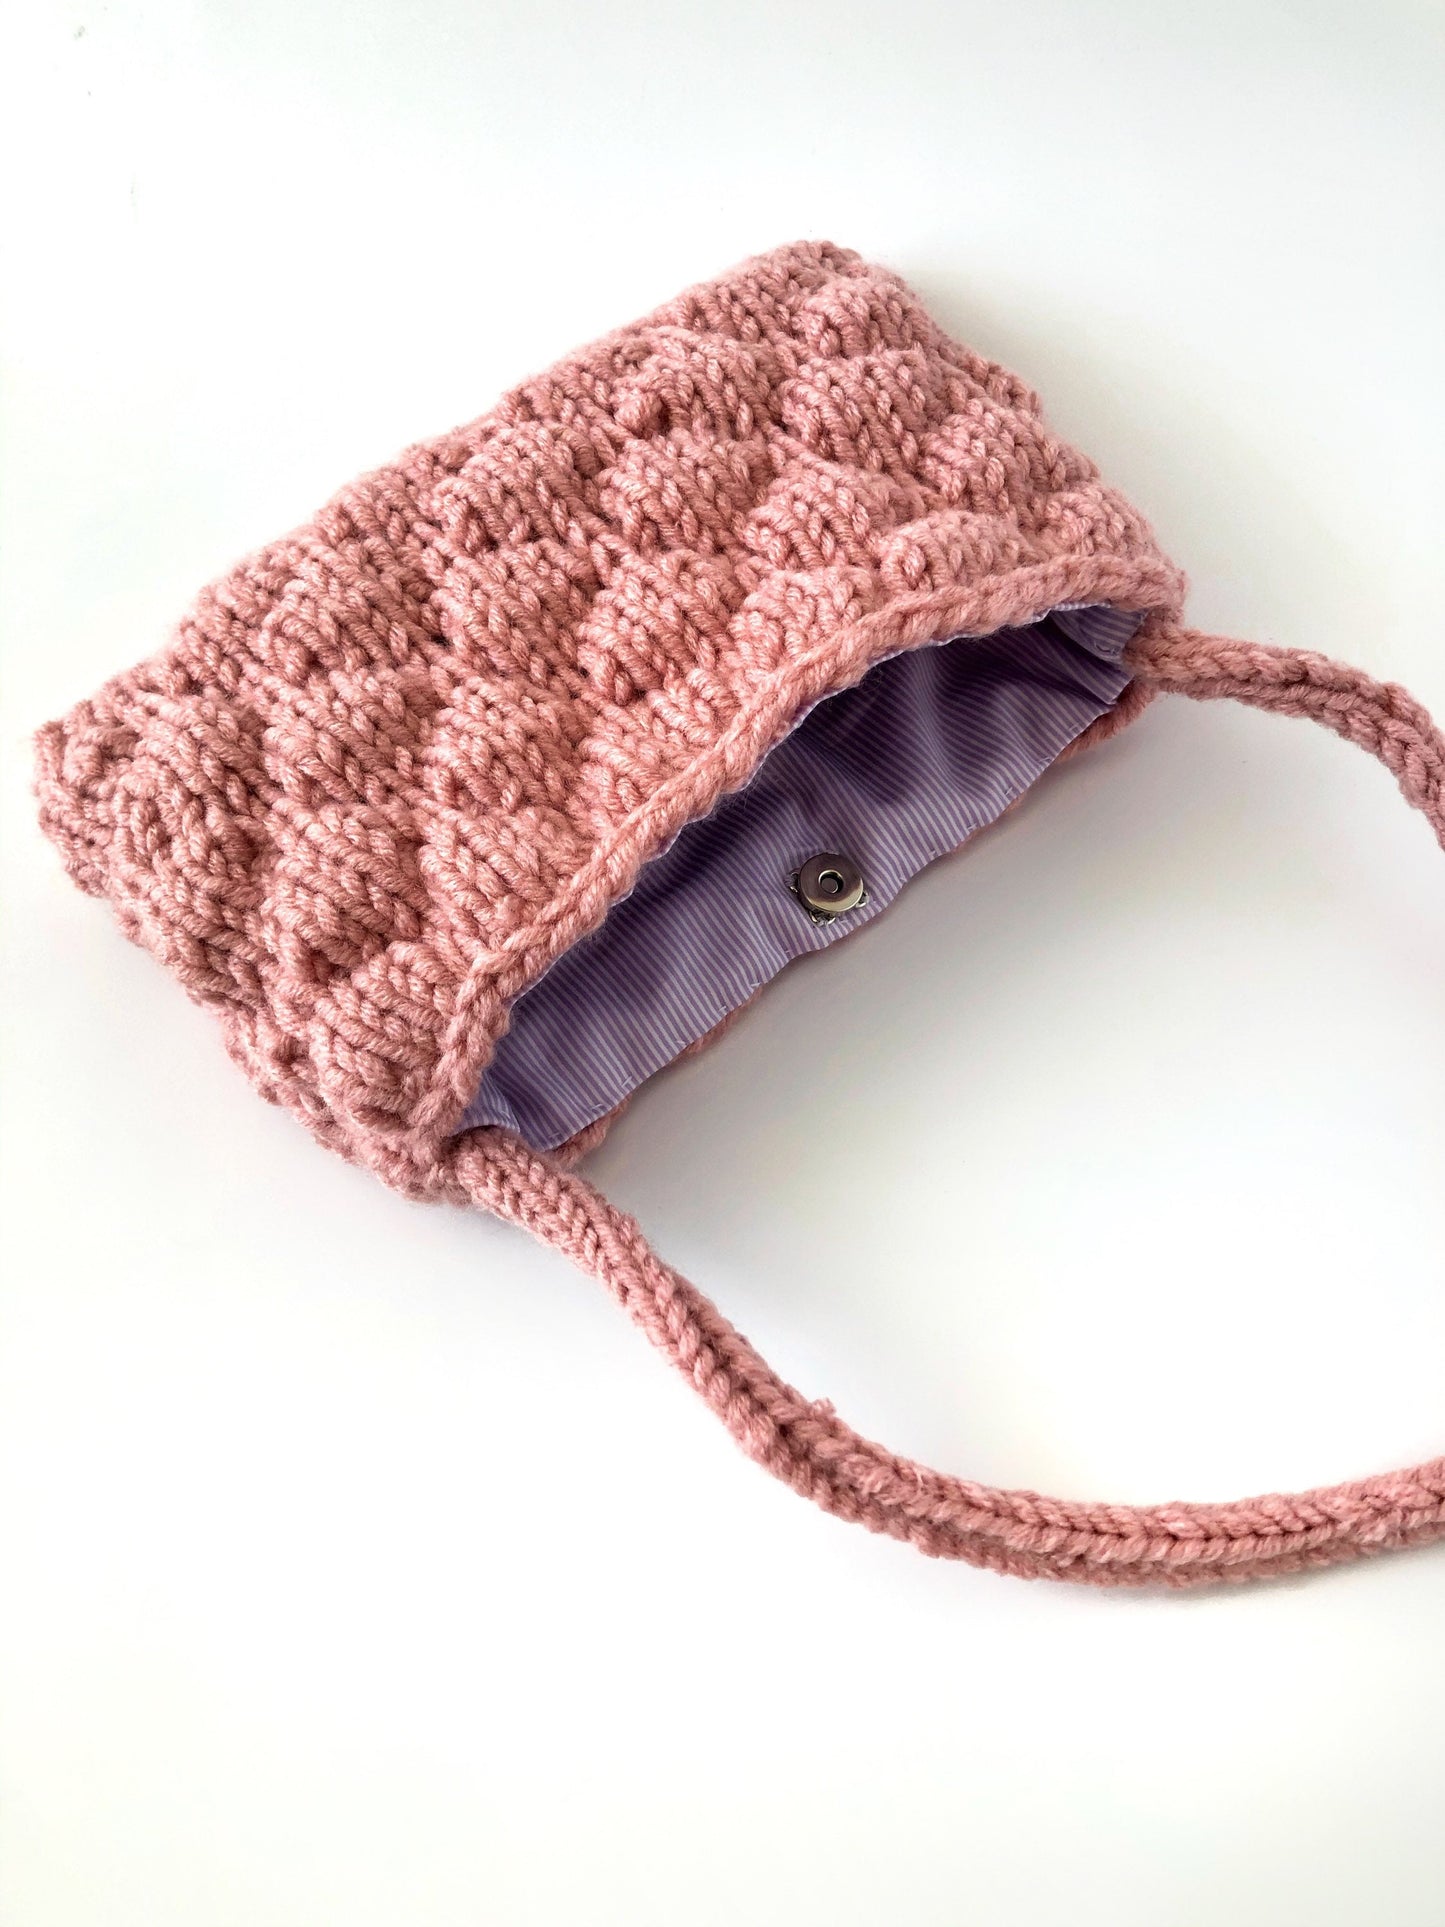 Bubbly Baguette Bag, Chunky Hand Knitted Purse